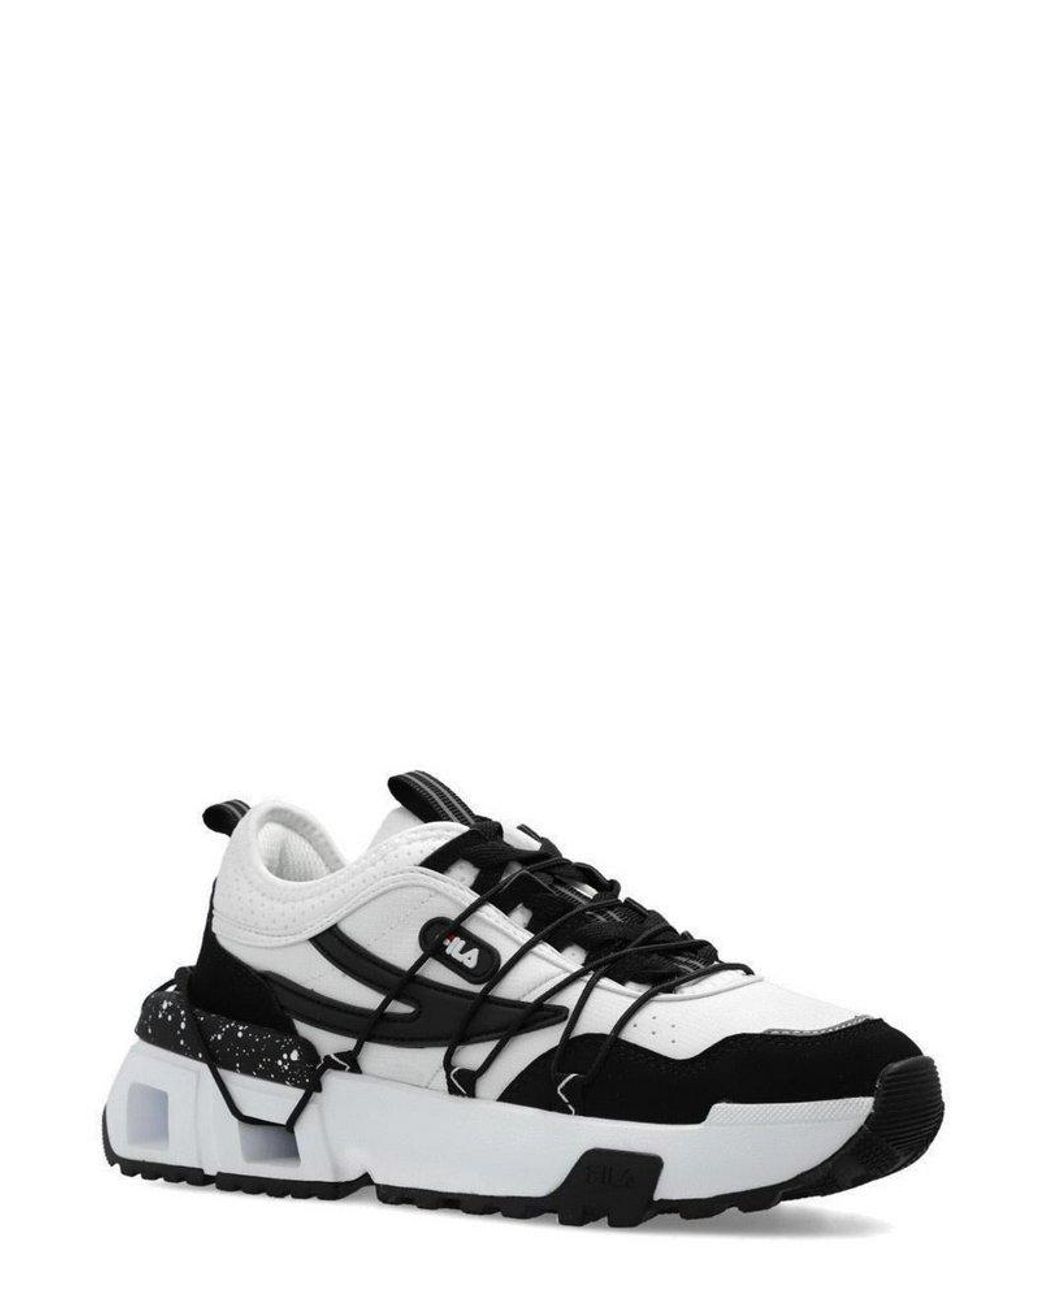 Fila Upgr 8 Lace-up Sneakers in White | Lyst